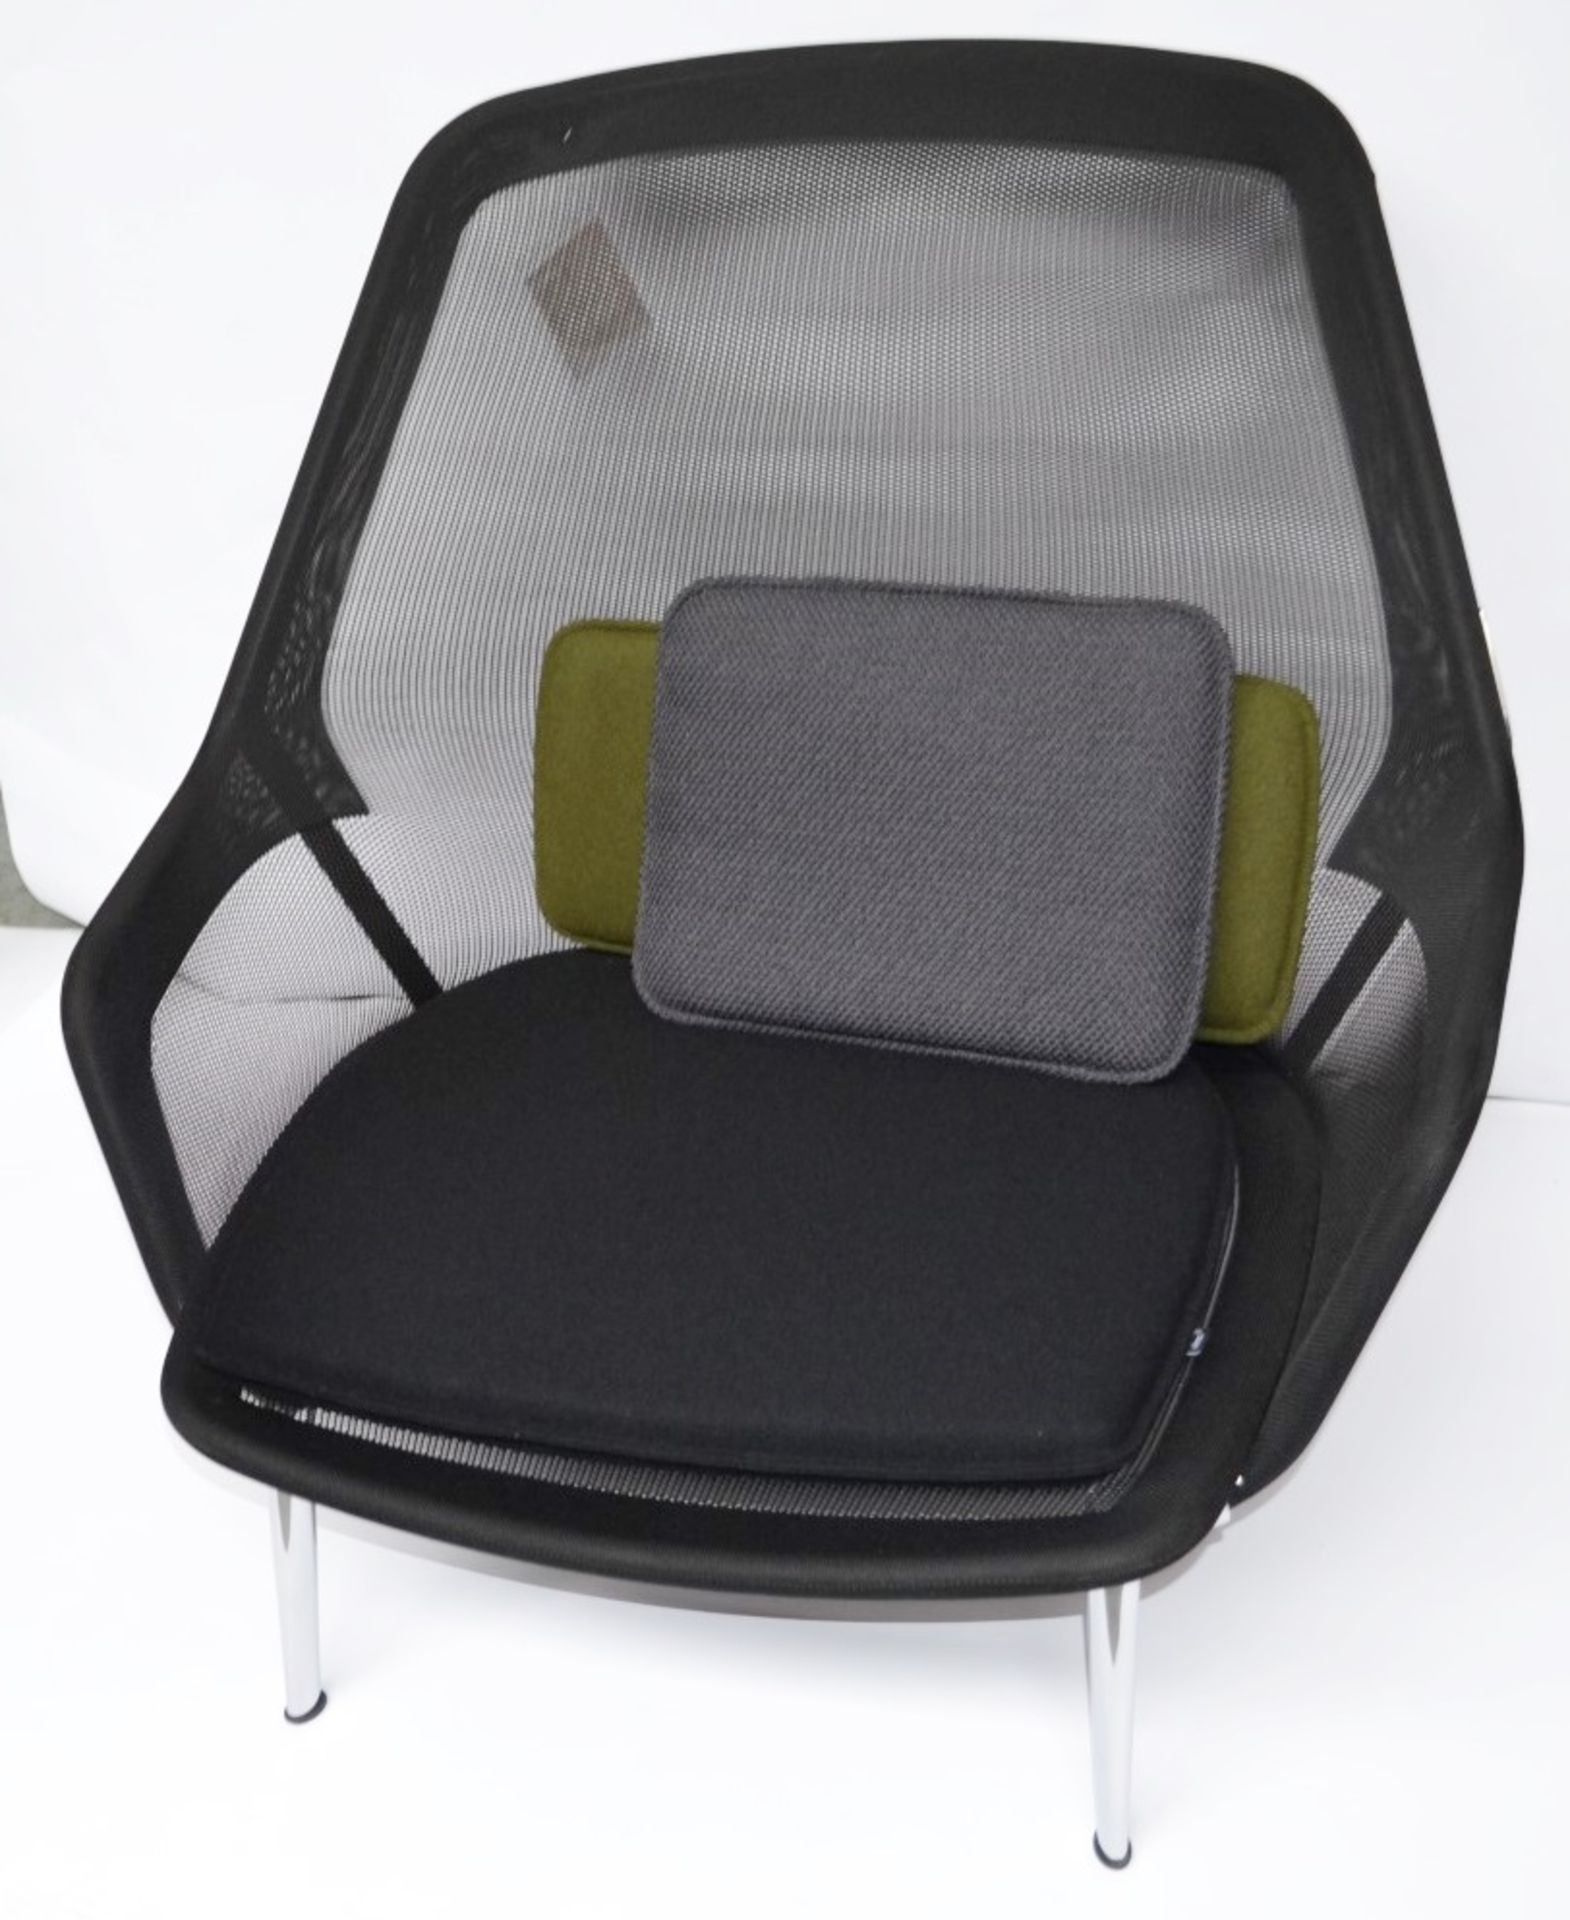 1 x VITRA Slow Chair & Ottoman With Cushions - Colour: Black & Chrome - Ref: 4708962 - CL087 - - Image 2 of 6